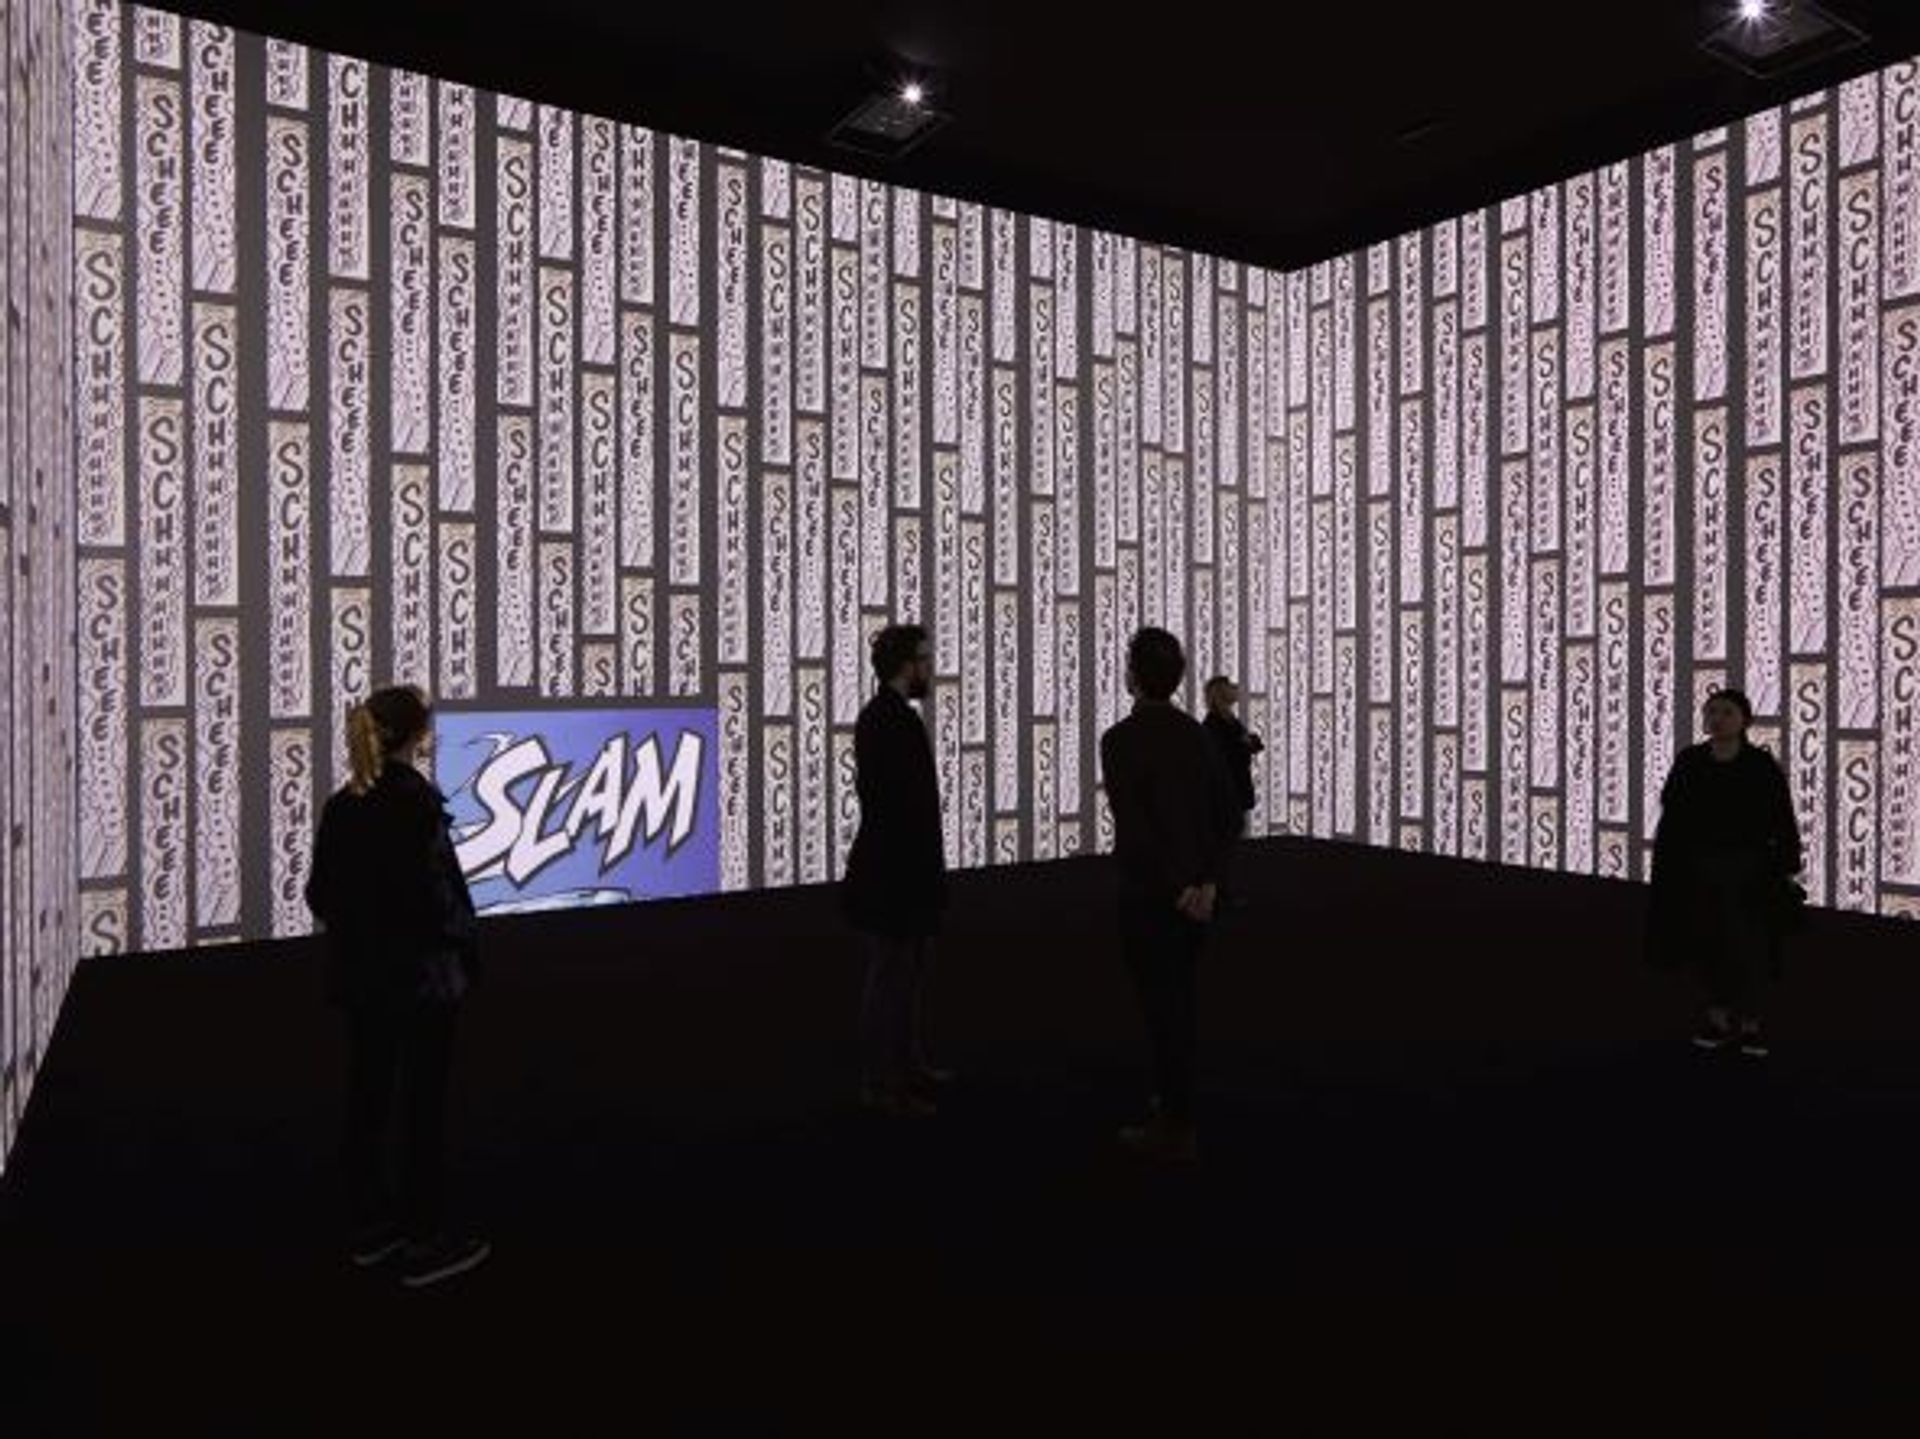 Christian Marclay, Surround Sounds, 2014-2015, installation vidéo couleur, 4 projections synchronisées en boucle. 

© Christian Marclay. Photo Christian Marclay Studio. Courtesy Aargauer Kunsthaus Aara